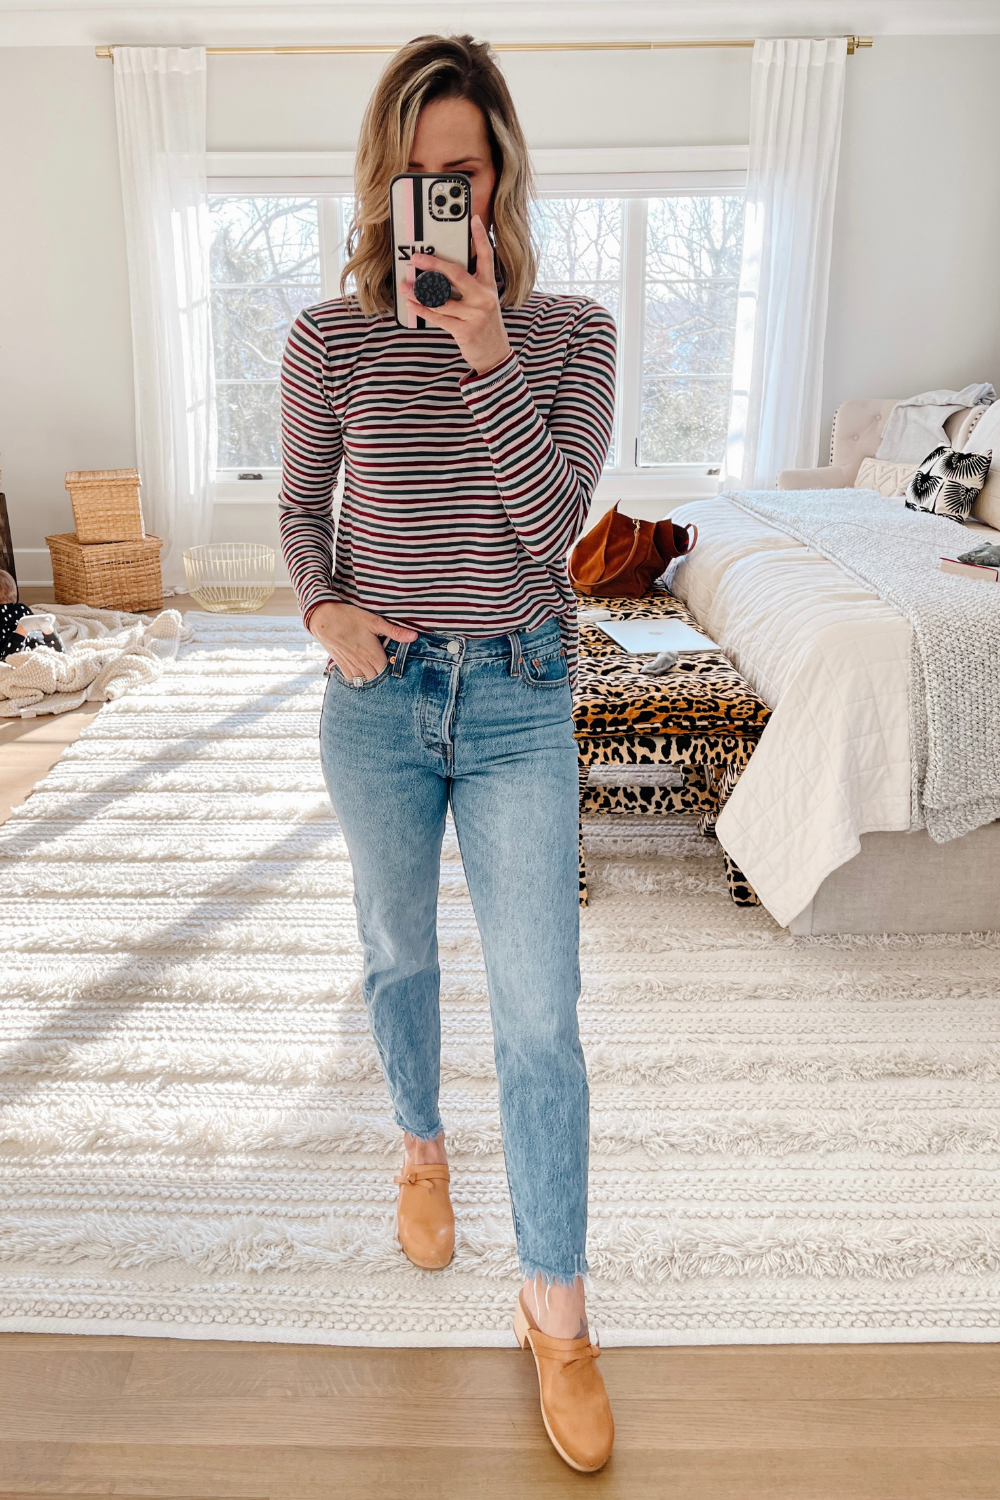 Suzanne wearing a striped turtleneck, straight leg denim, and clogs